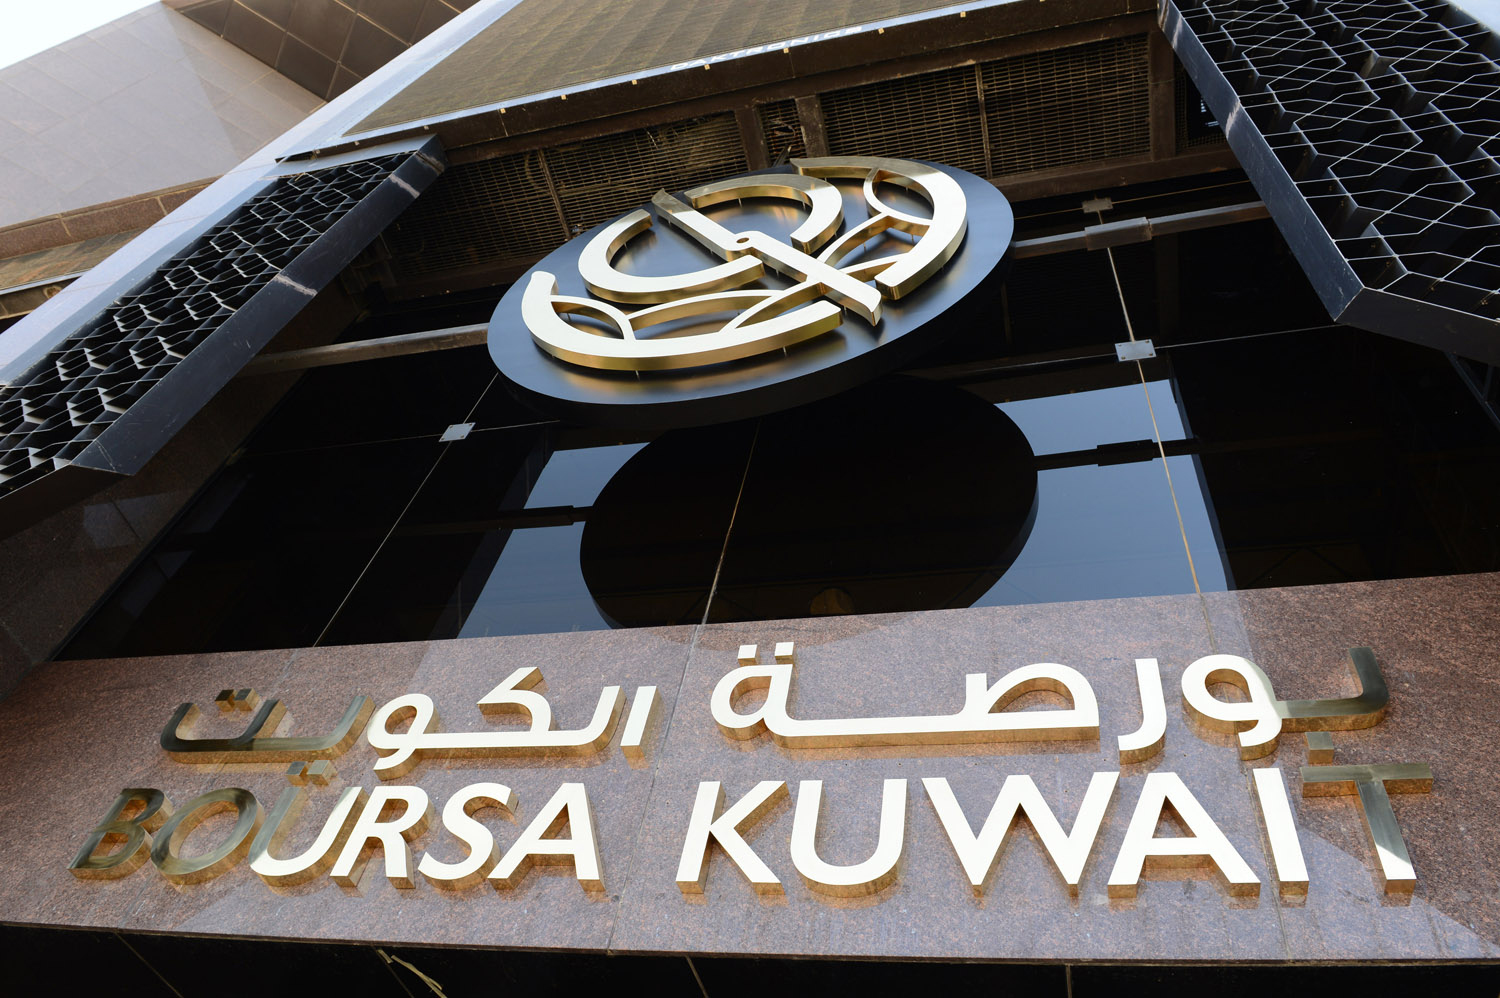 Boursa Kuwait sheds 82.4 points upon closing dropping to 6,176.06 points